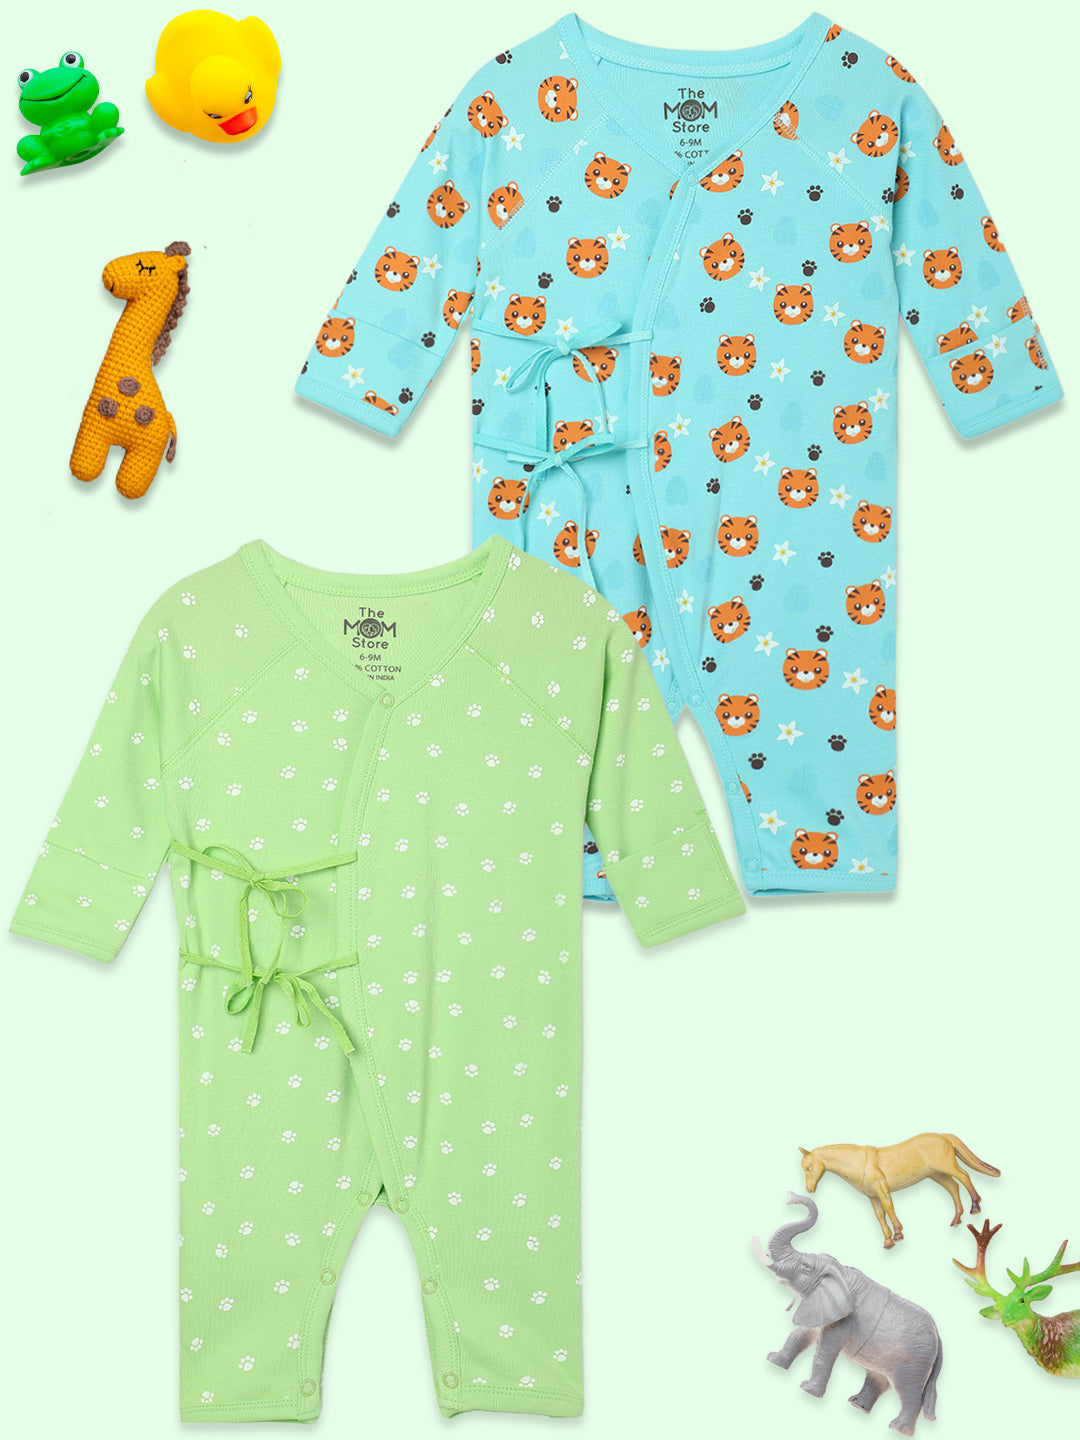 Jabla Infant Romper Combo Of 2: Feline Fighters - Staying Pawsitive